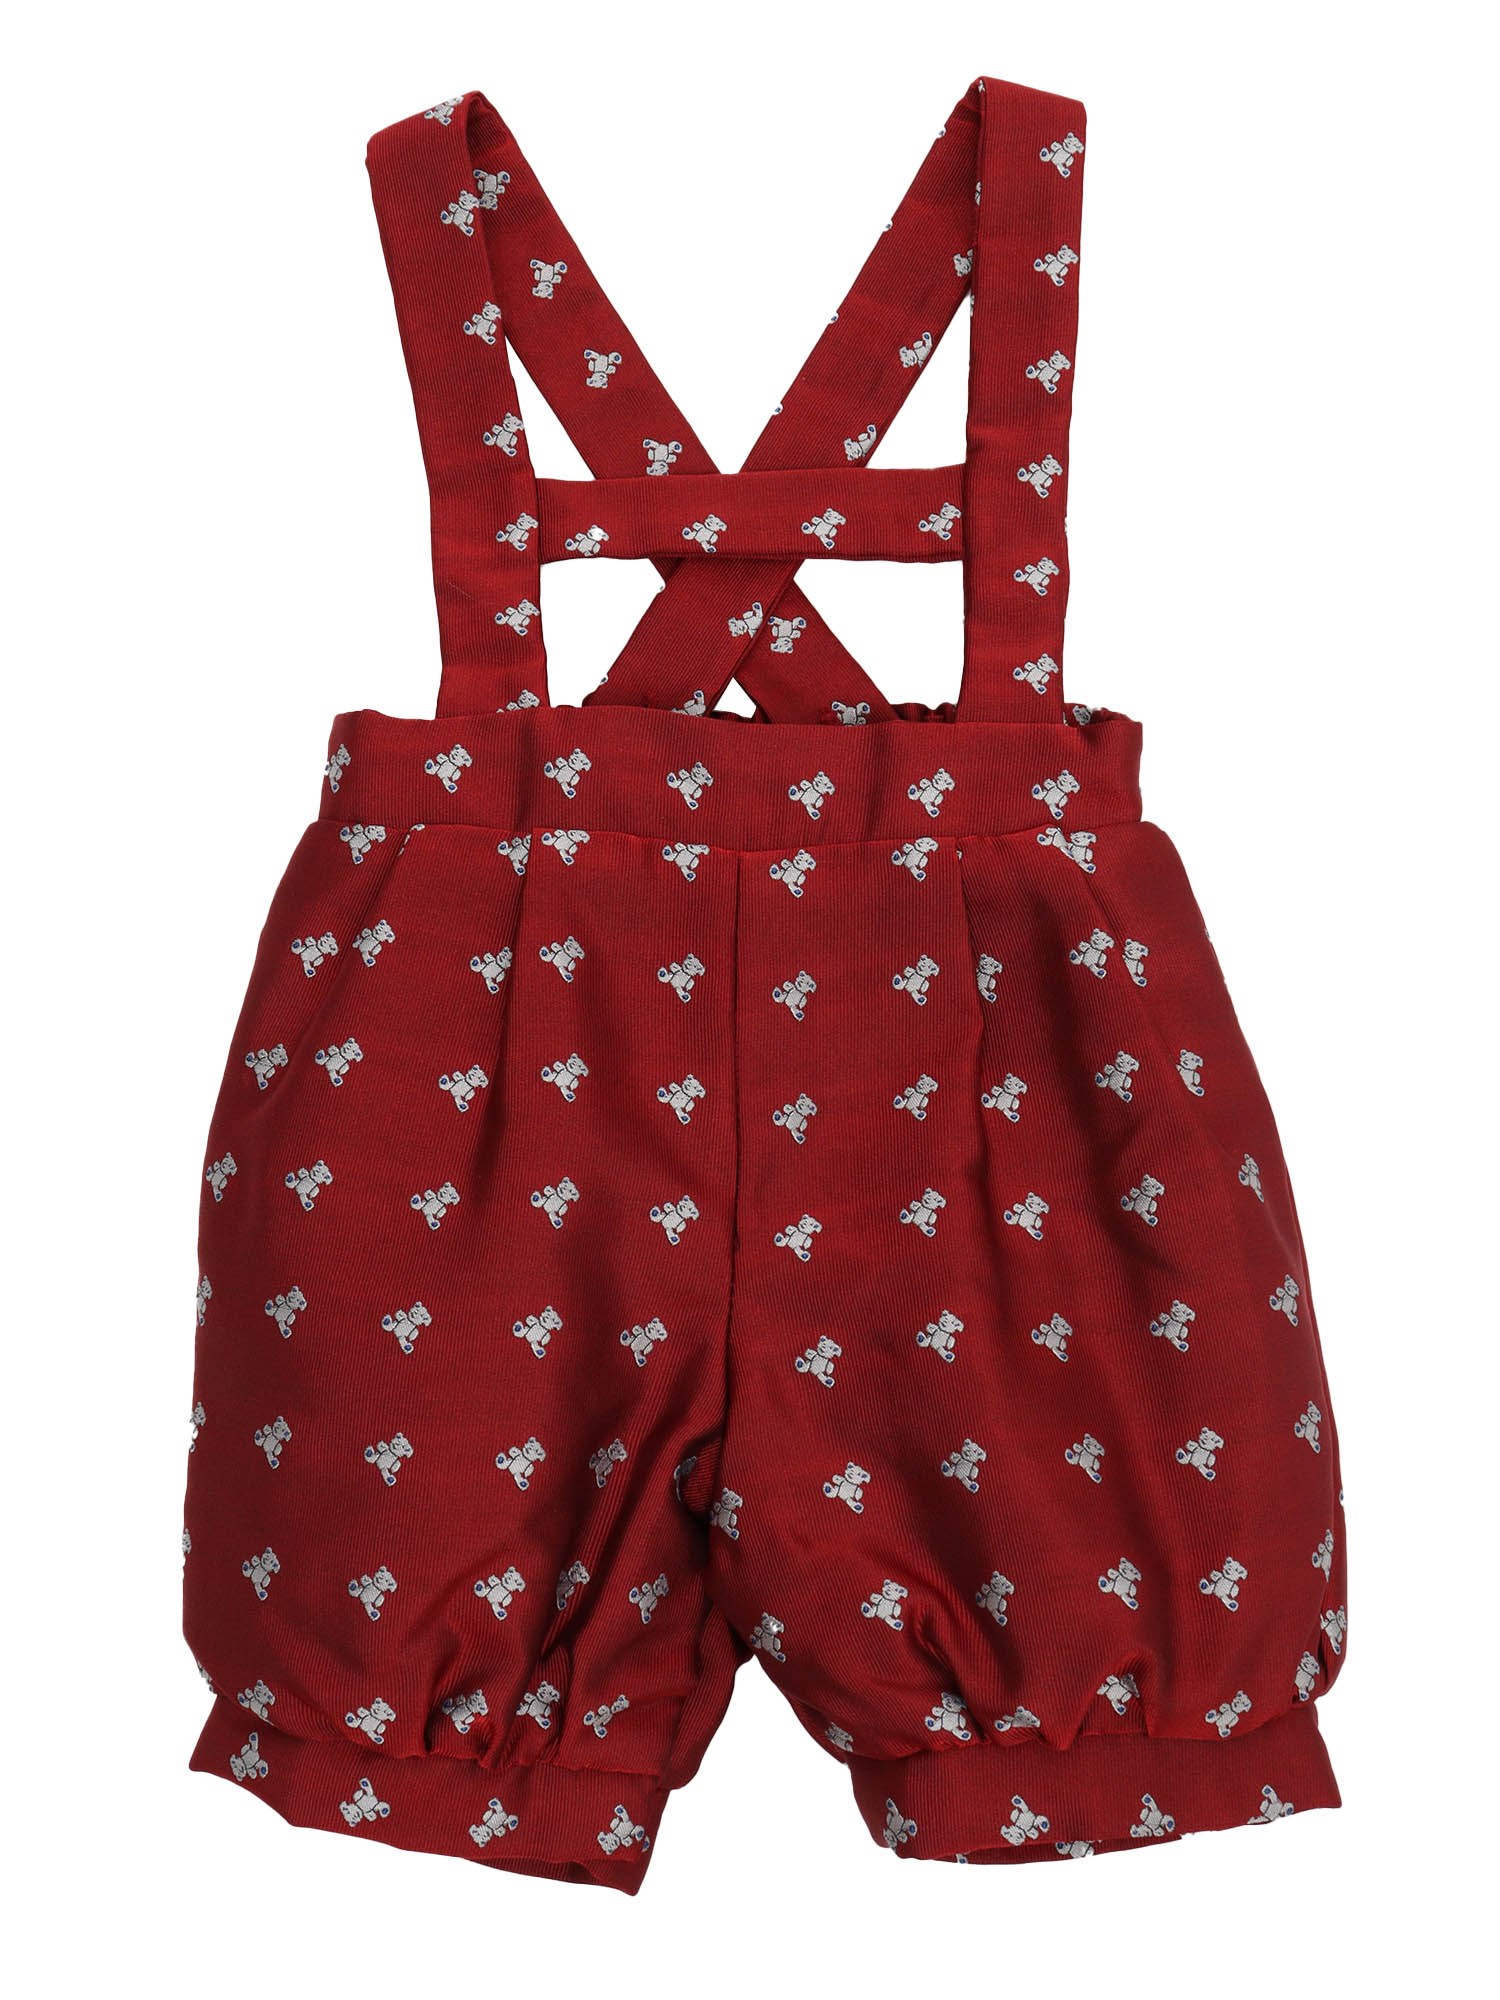 La Stupenderia Tyrol Dungarees In Red